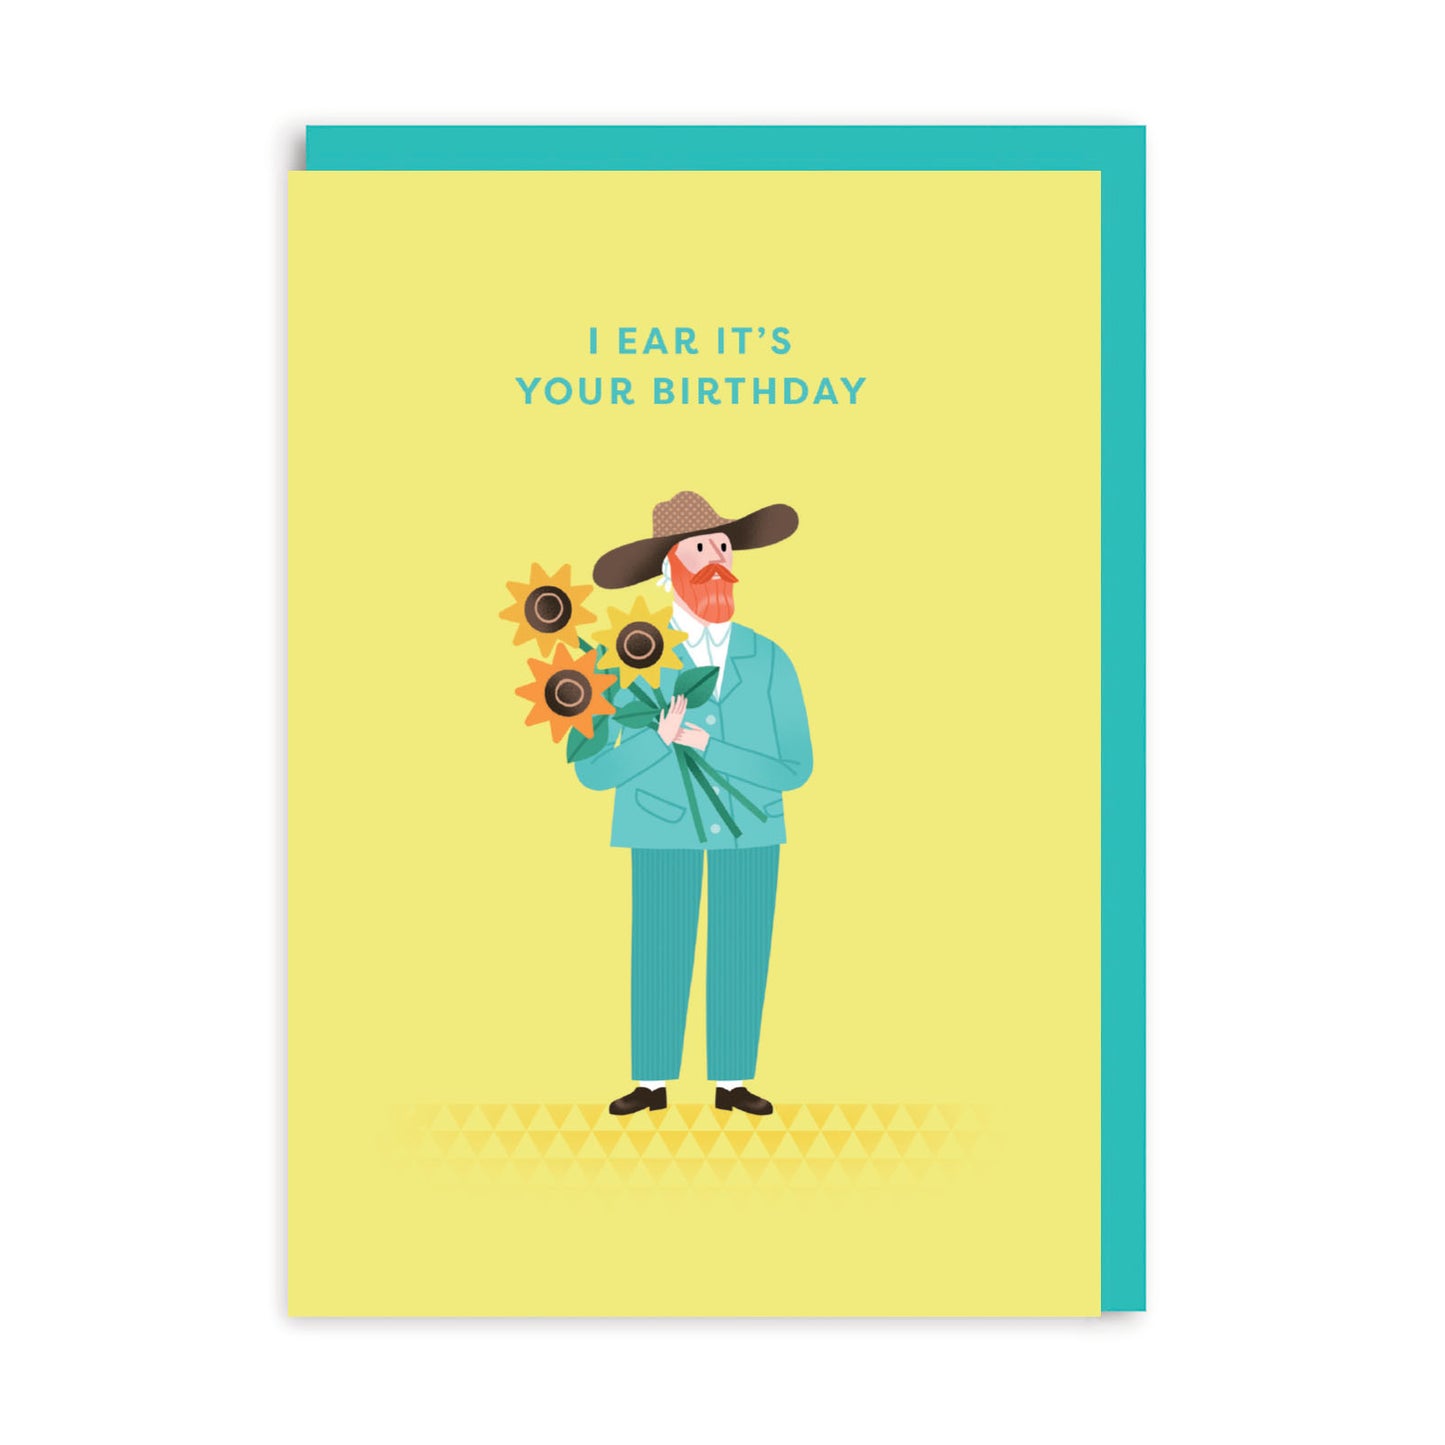 Birthday cards with a Van Gogh illustration and the caption I ear it's your birthday